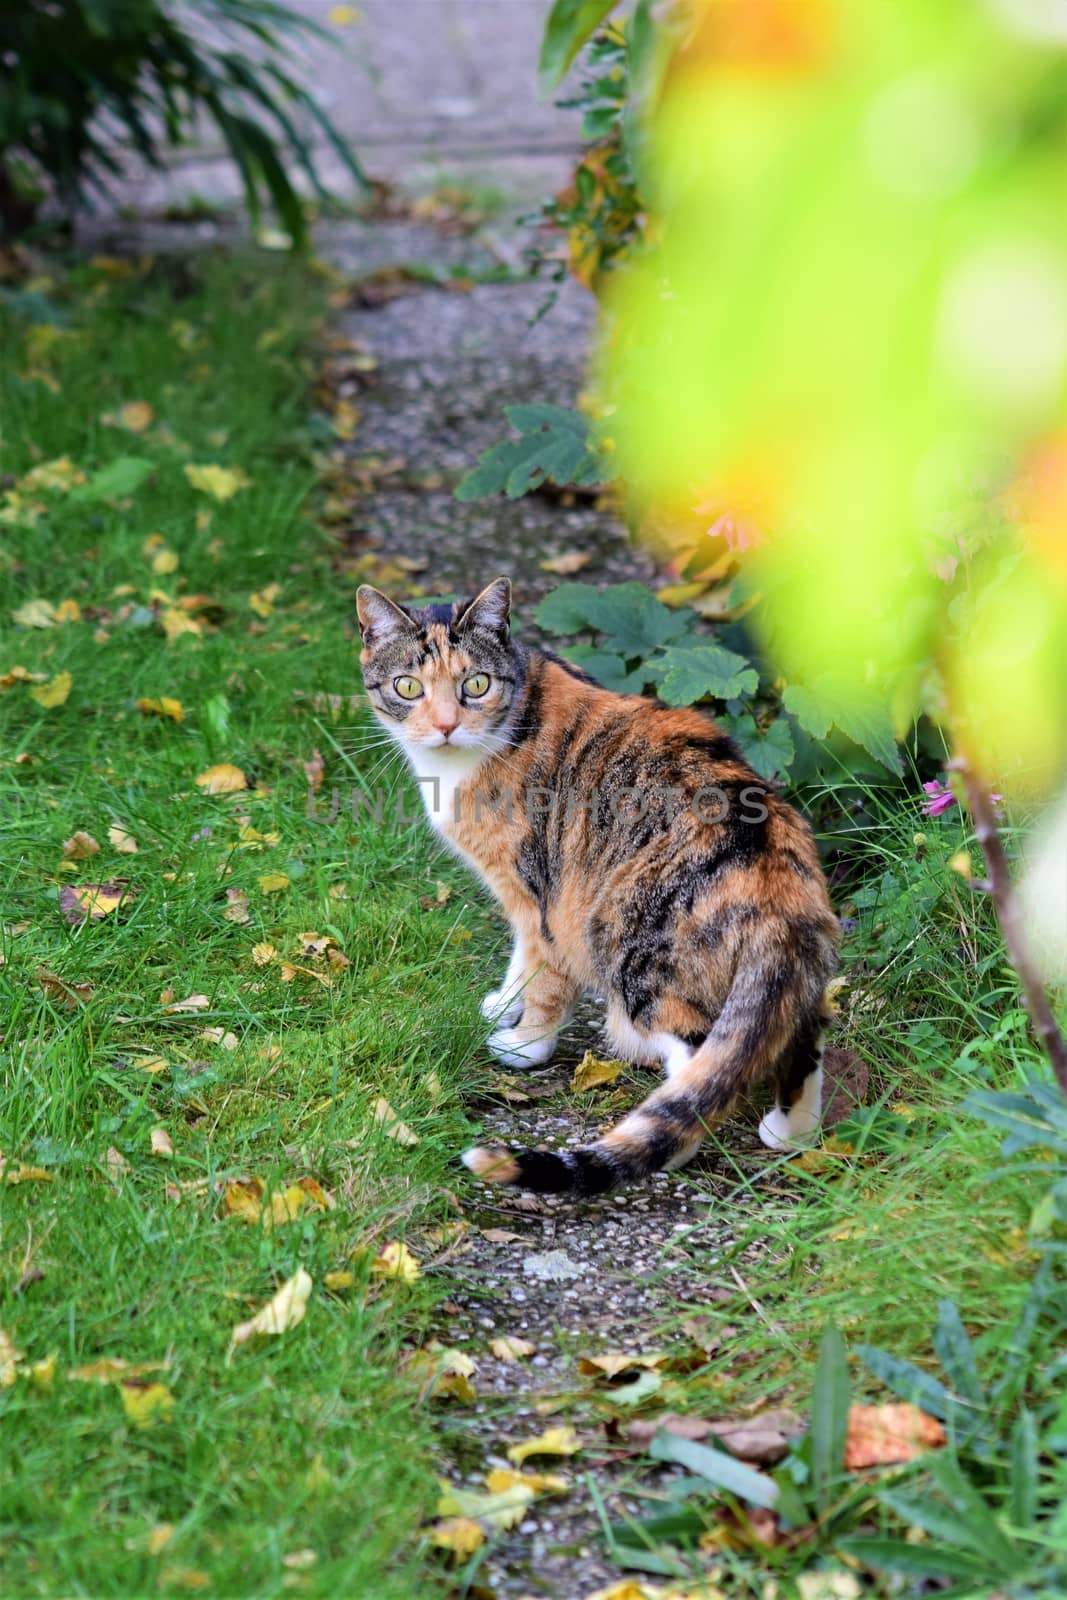 Tricolor cat turning around on a garden path next to green lawn